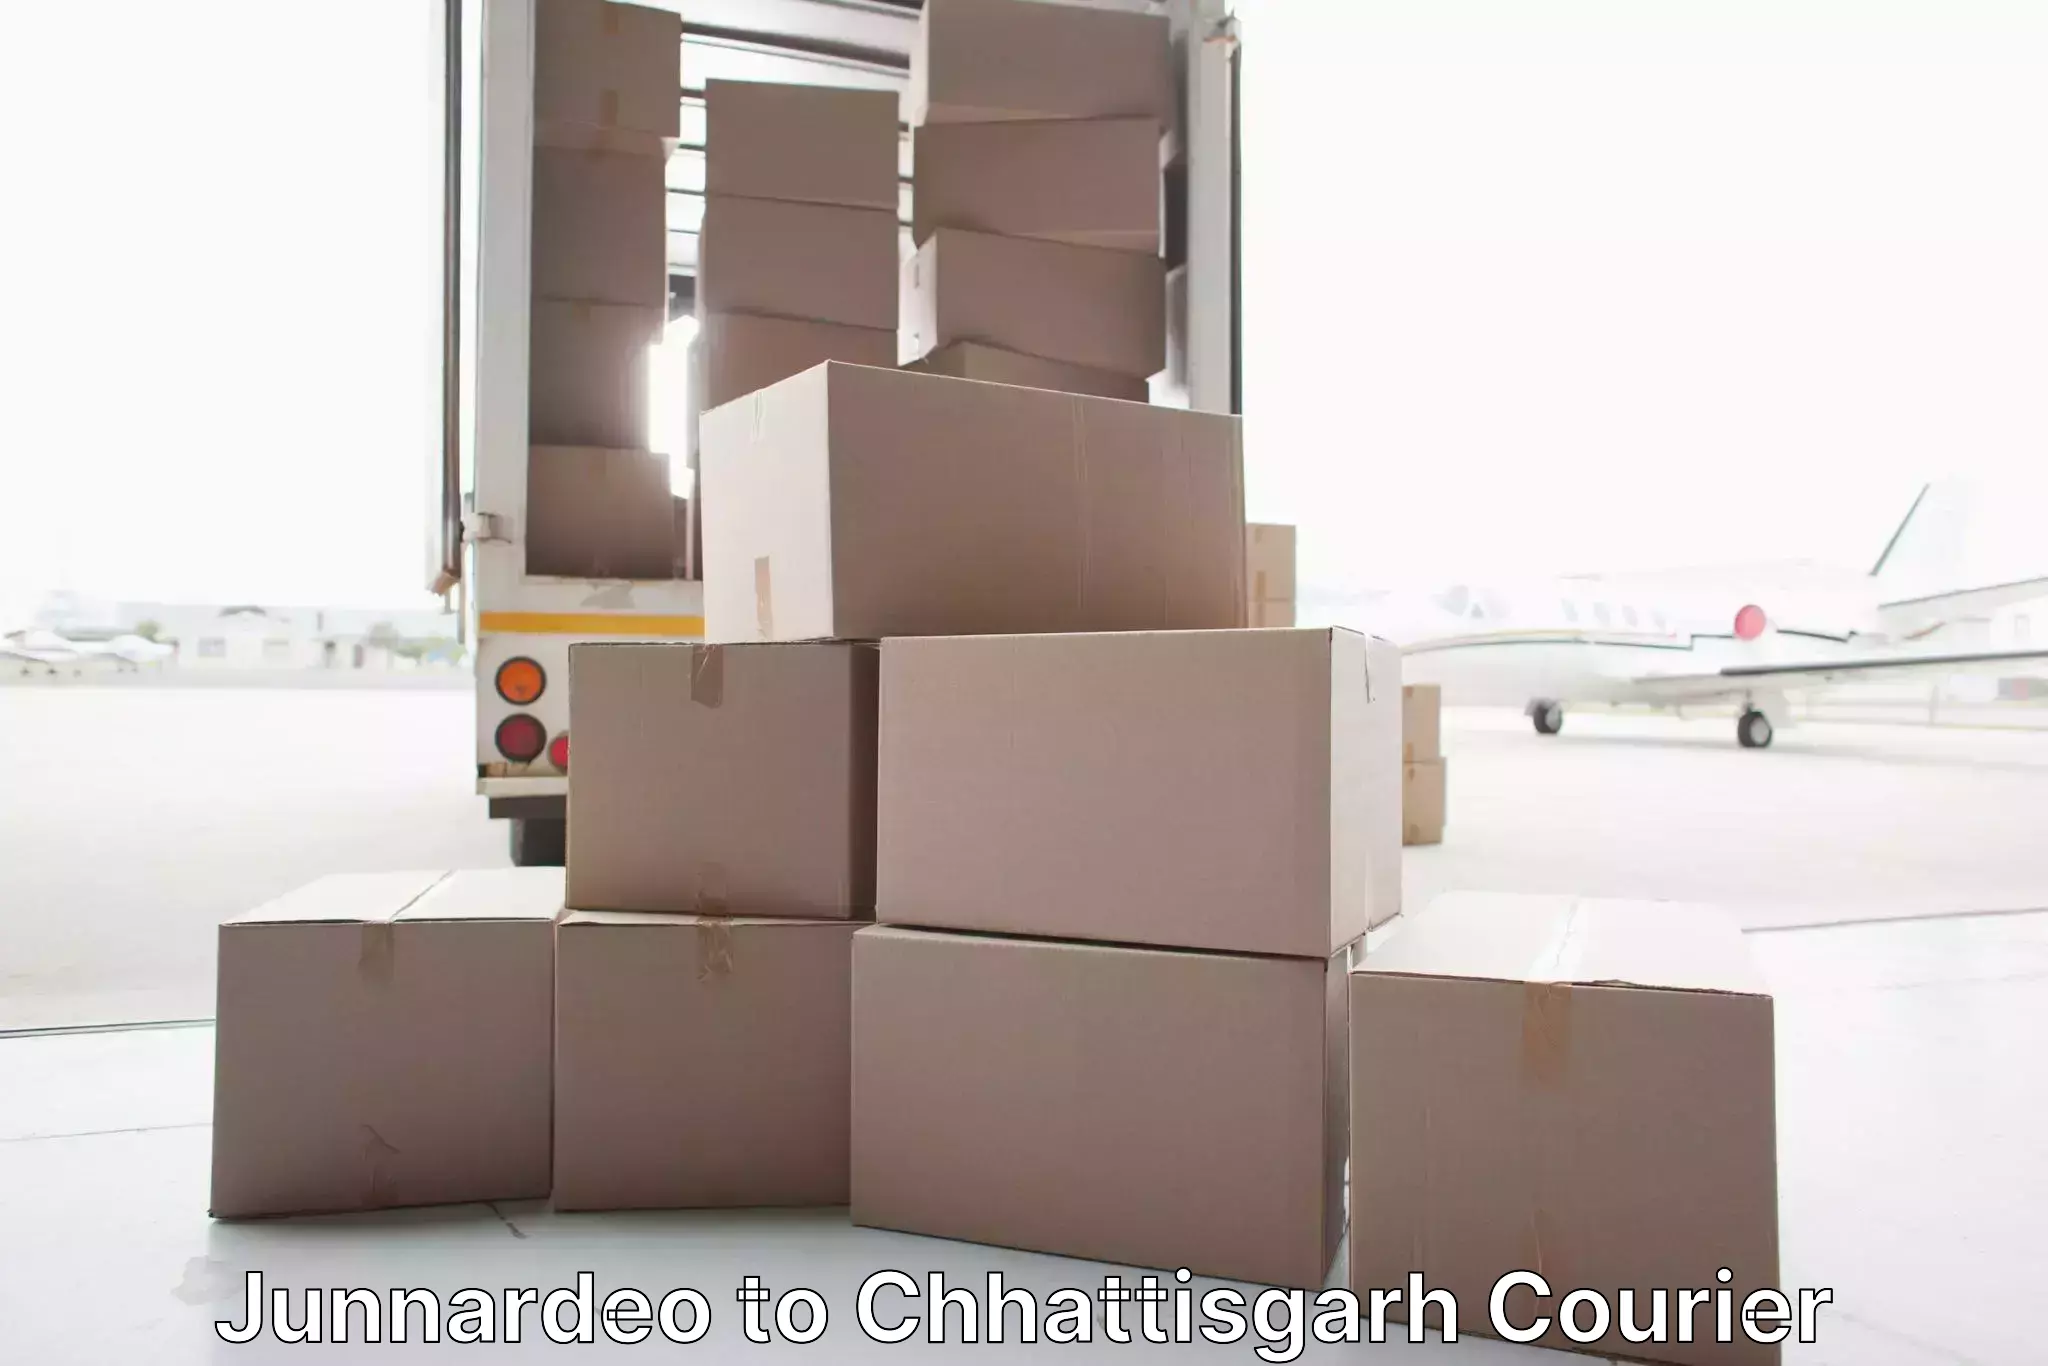 Quality moving and storage Junnardeo to Berla